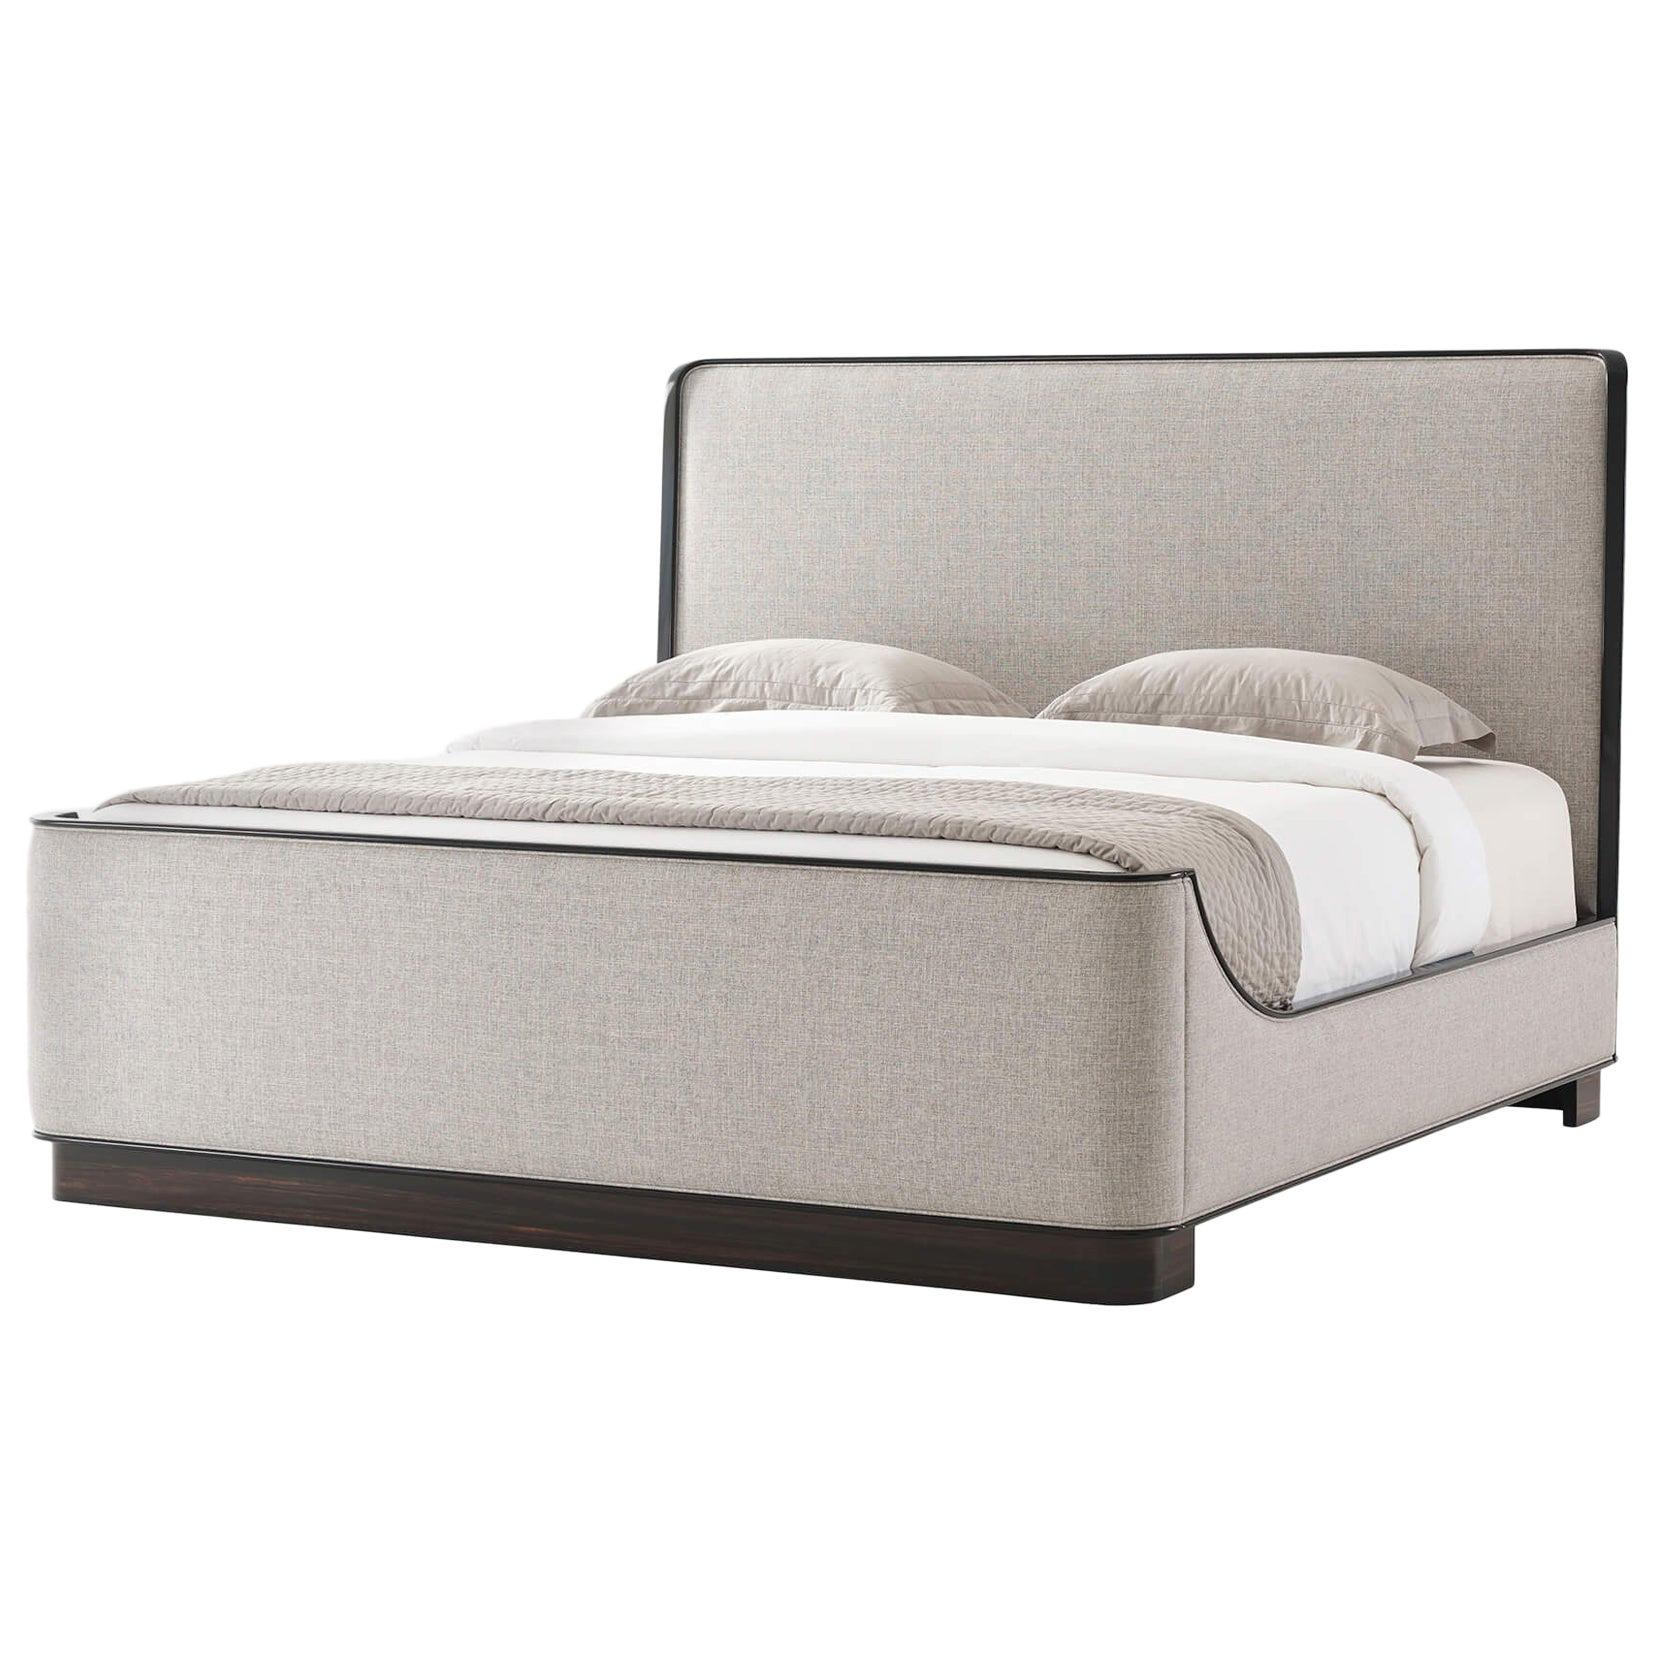 Midcentury Upholstered King Size Bed